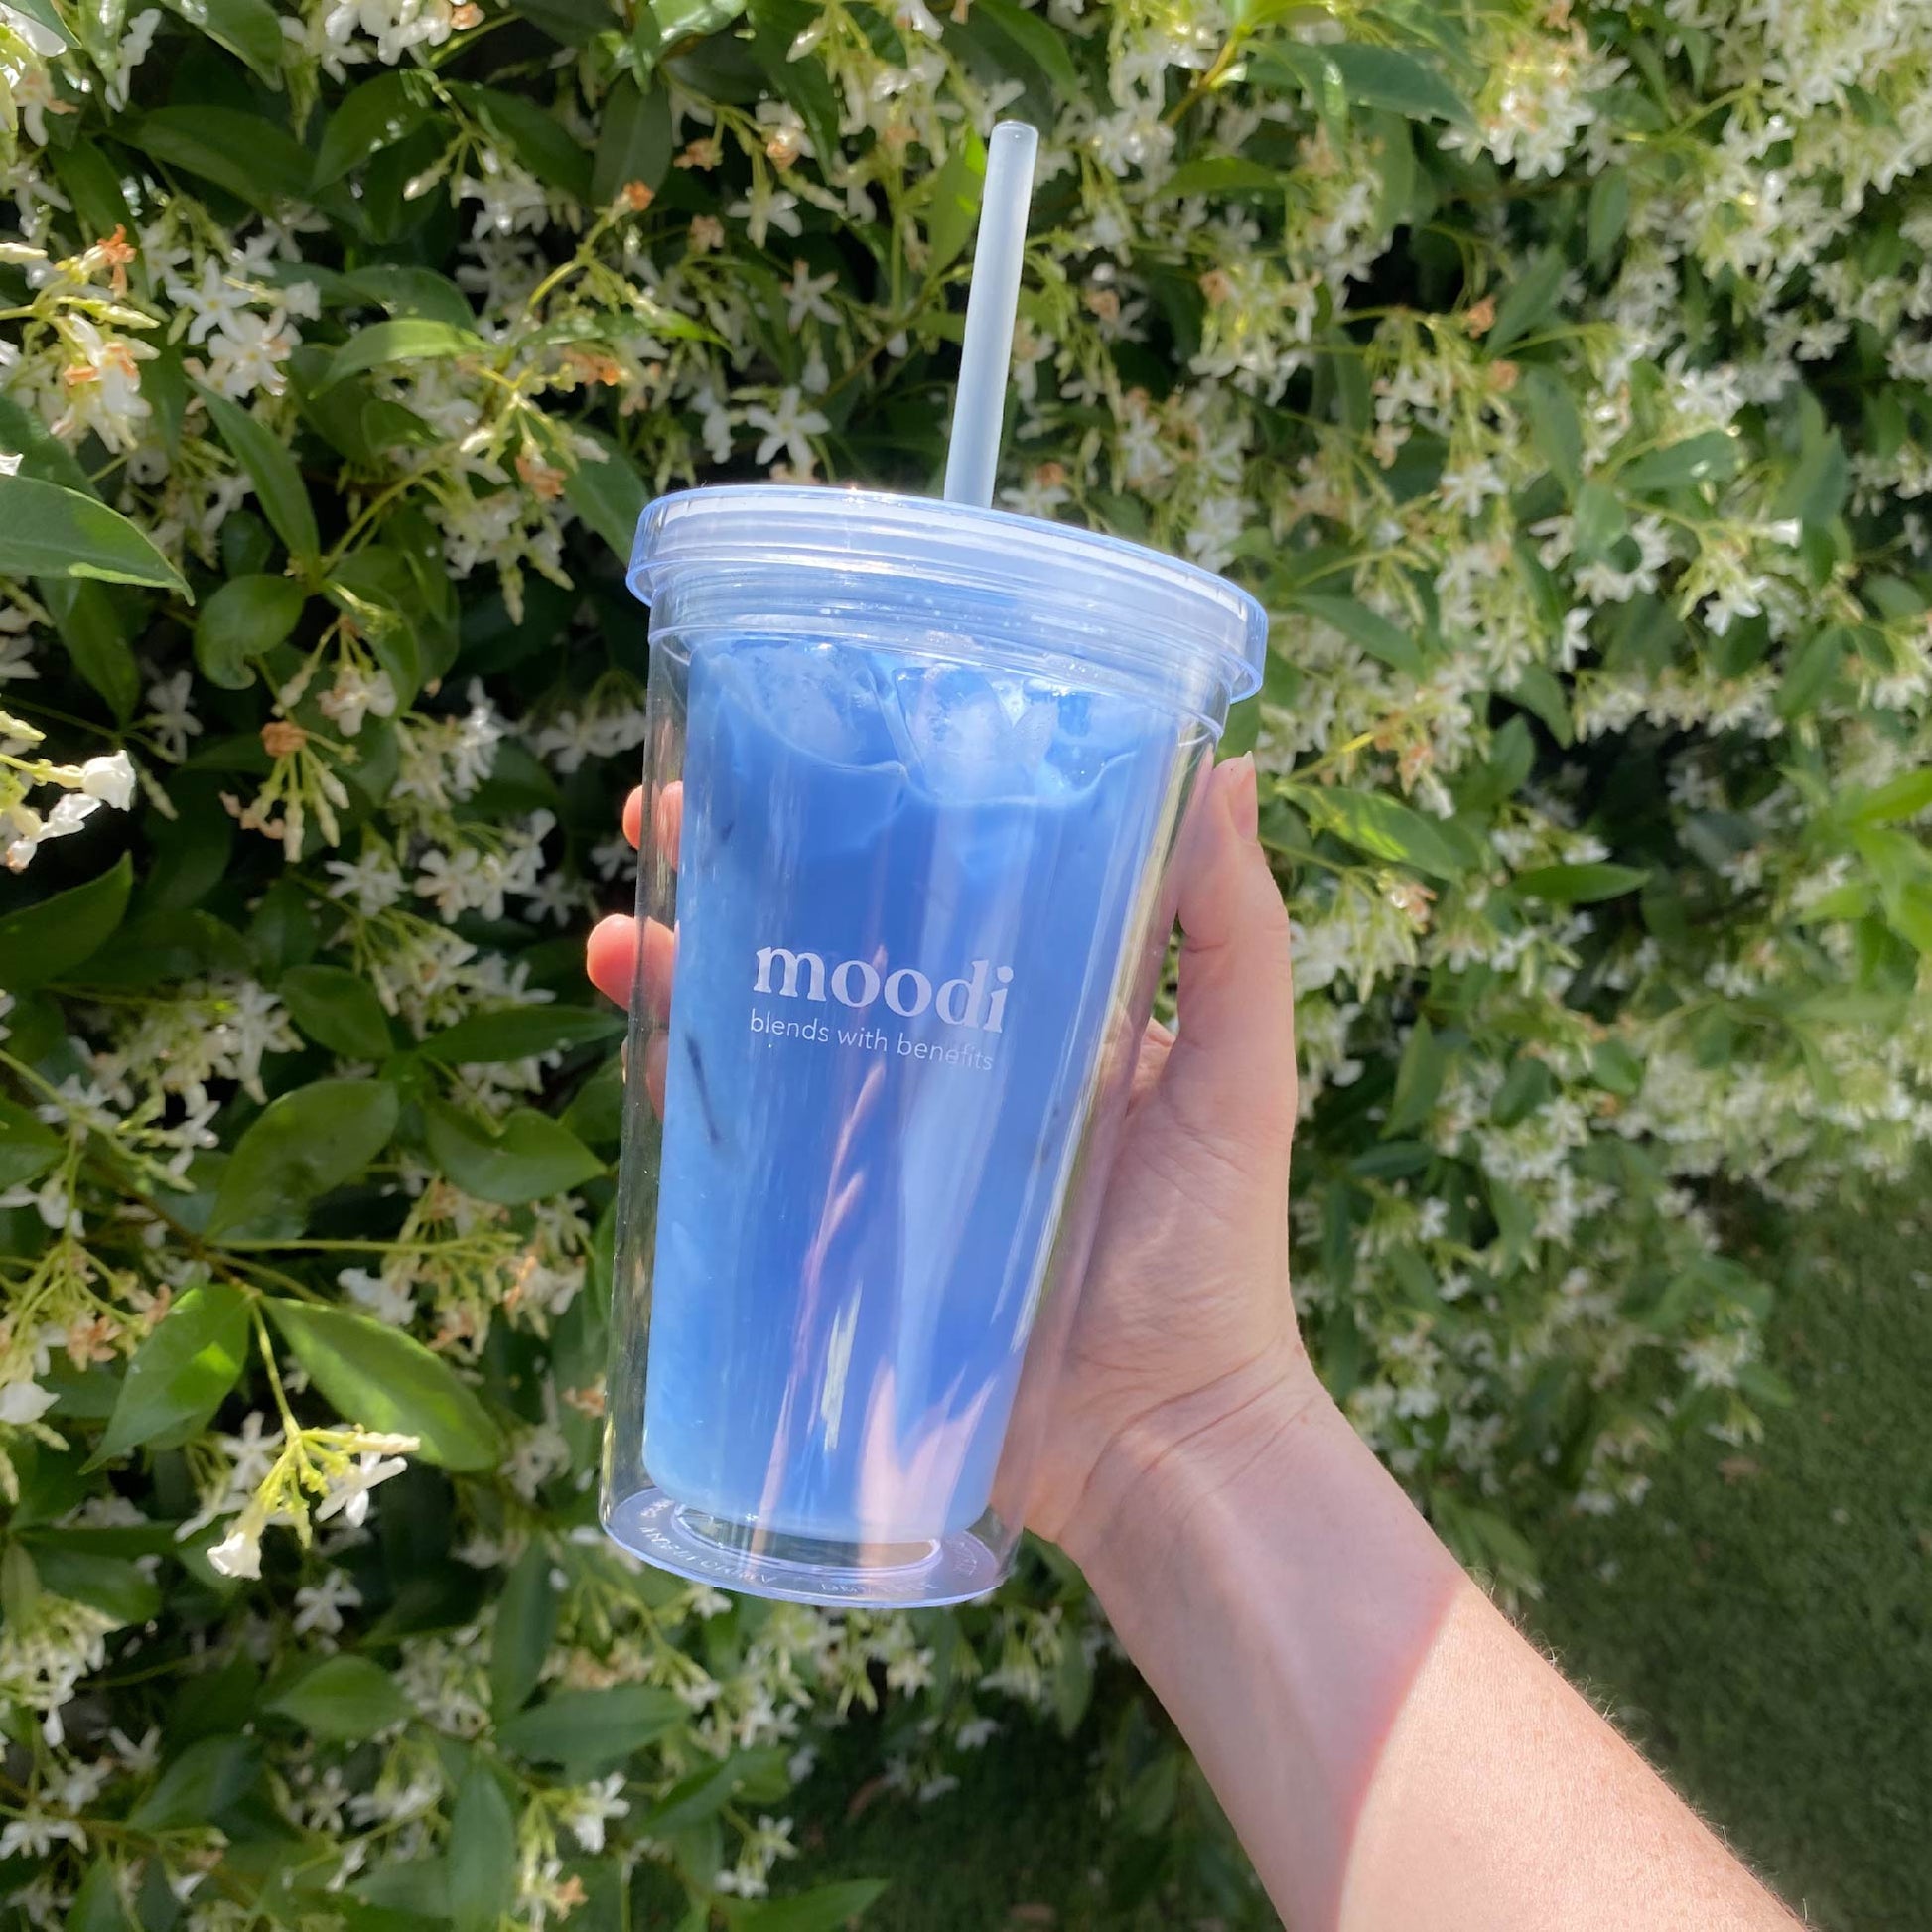 Blends with Benefits Tumbler - Moodi - Accessories